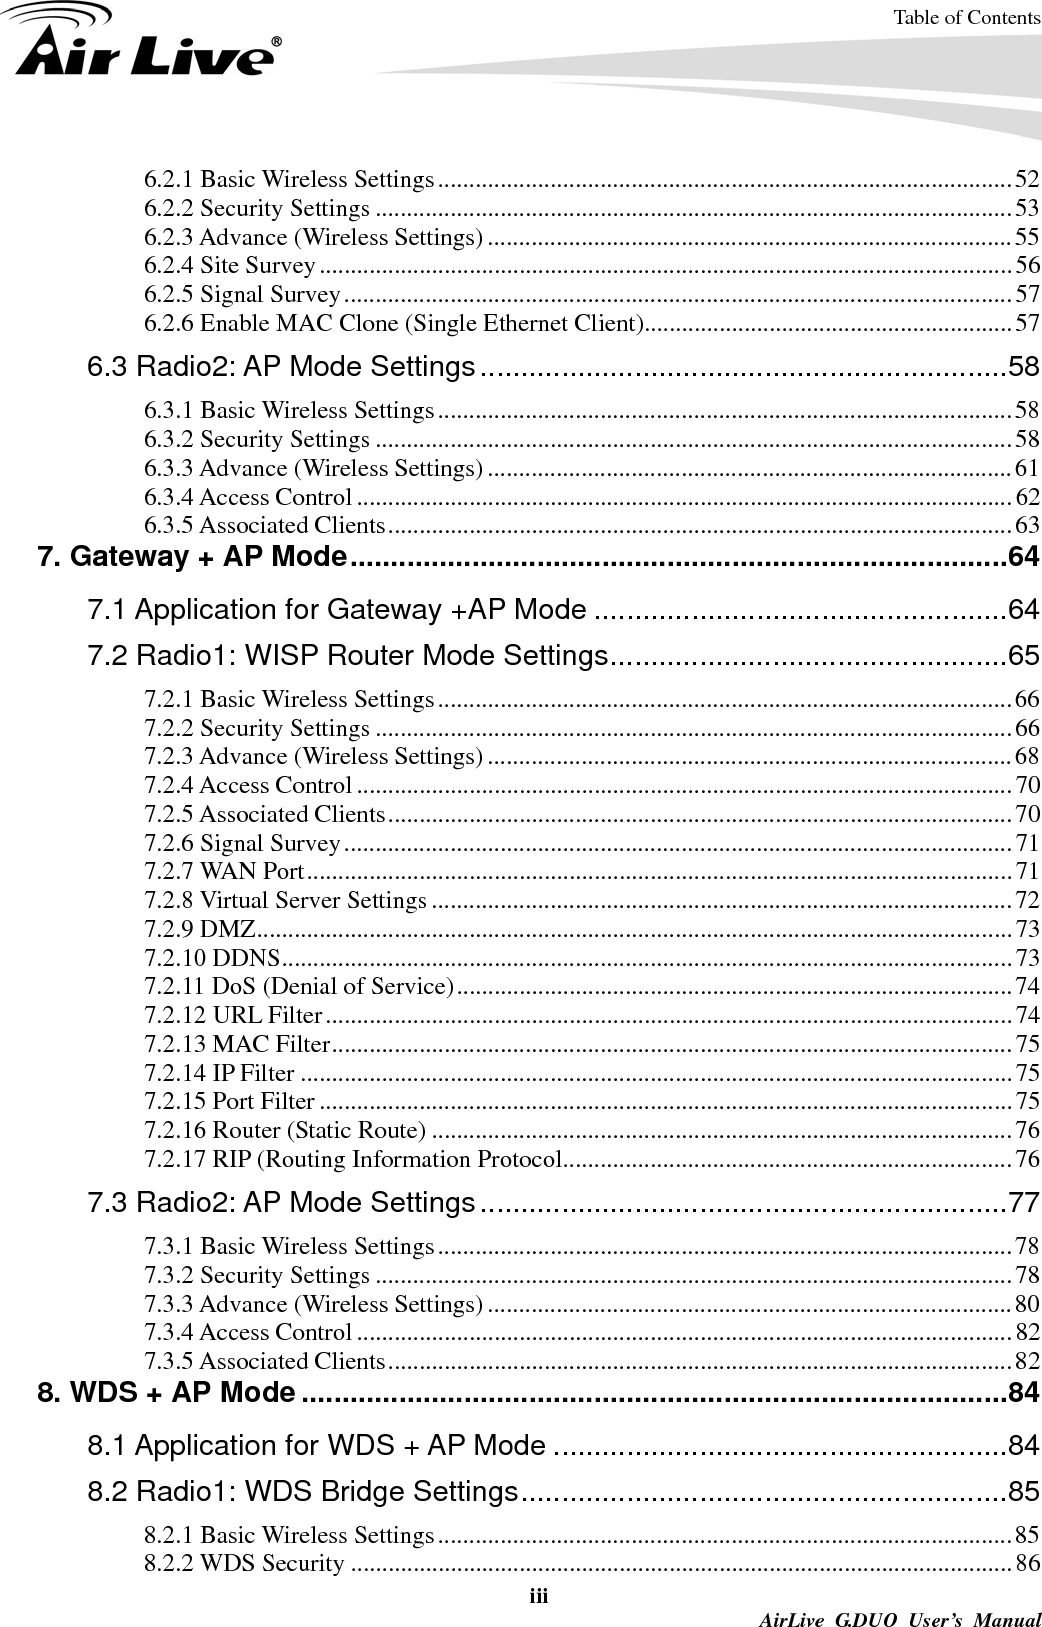 Table of Contents iii AirLive G.DUO User’s Manual 6.2.1 Basic Wireless Settings ............................................................................................ 52 6.2.2 Security Settings ...................................................................................................... 53 6.2.3 Advance (Wireless Settings) .................................................................................... 55 6.2.4 Site Survey ............................................................................................................... 56 6.2.5 Signal Survey ........................................................................................................... 57 6.2.6 Enable MAC Clone (Single Ethernet Client) ........................................................... 57 6.3 Radio2: AP Mode Settings ................................................................. 58 6.3.1 Basic Wireless Settings ............................................................................................ 58 6.3.2 Security Settings ...................................................................................................... 58 6.3.3 Advance (Wireless Settings) .................................................................................... 61 6.3.4 Access Control ......................................................................................................... 62 6.3.5 Associated Clients .................................................................................................... 63 7. Gateway + AP Mode ................................................................................. 64 7.1 Application for Gateway +AP Mode ................................................... 64 7.2 Radio1: WISP Router Mode Settings ................................................. 65 7.2.1 Basic Wireless Settings ............................................................................................ 66 7.2.2 Security Settings ...................................................................................................... 66 7.2.3 Advance (Wireless Settings) .................................................................................... 68 7.2.4 Access Control ......................................................................................................... 70 7.2.5 Associated Clients .................................................................................................... 70 7.2.6 Signal Survey ........................................................................................................... 71 7.2.7 WAN Port ................................................................................................................. 71 7.2.8 Virtual Server Settings ............................................................................................. 72 7.2.9 DMZ ......................................................................................................................... 73 7.2.10 DDNS ..................................................................................................................... 73 7.2.11 DoS (Denial of Service) ......................................................................................... 74 7.2.12 URL Filter .............................................................................................................. 74 7.2.13 MAC Filter ............................................................................................................. 75 7.2.14 IP Filter .................................................................................................................. 75 7.2.15 Port Filter ............................................................................................................... 75 7.2.16 Router (Static Route) ............................................................................................. 76 7.2.17 RIP (Routing Information Protocol ........................................................................ 76 7.3 Radio2: AP Mode Settings ................................................................. 77 7.3.1 Basic Wireless Settings ............................................................................................ 78 7.3.2 Security Settings ...................................................................................................... 78 7.3.3 Advance (Wireless Settings) .................................................................................... 80 7.3.4 Access Control ......................................................................................................... 82 7.3.5 Associated Clients .................................................................................................... 82 8. WDS + AP Mode ....................................................................................... 84 8.1 Application for WDS + AP Mode ........................................................ 84 8.2 Radio1: WDS Bridge Settings ............................................................ 85 8.2.1 Basic Wireless Settings ............................................................................................ 85 8.2.2 WDS Security .......................................................................................................... 86 